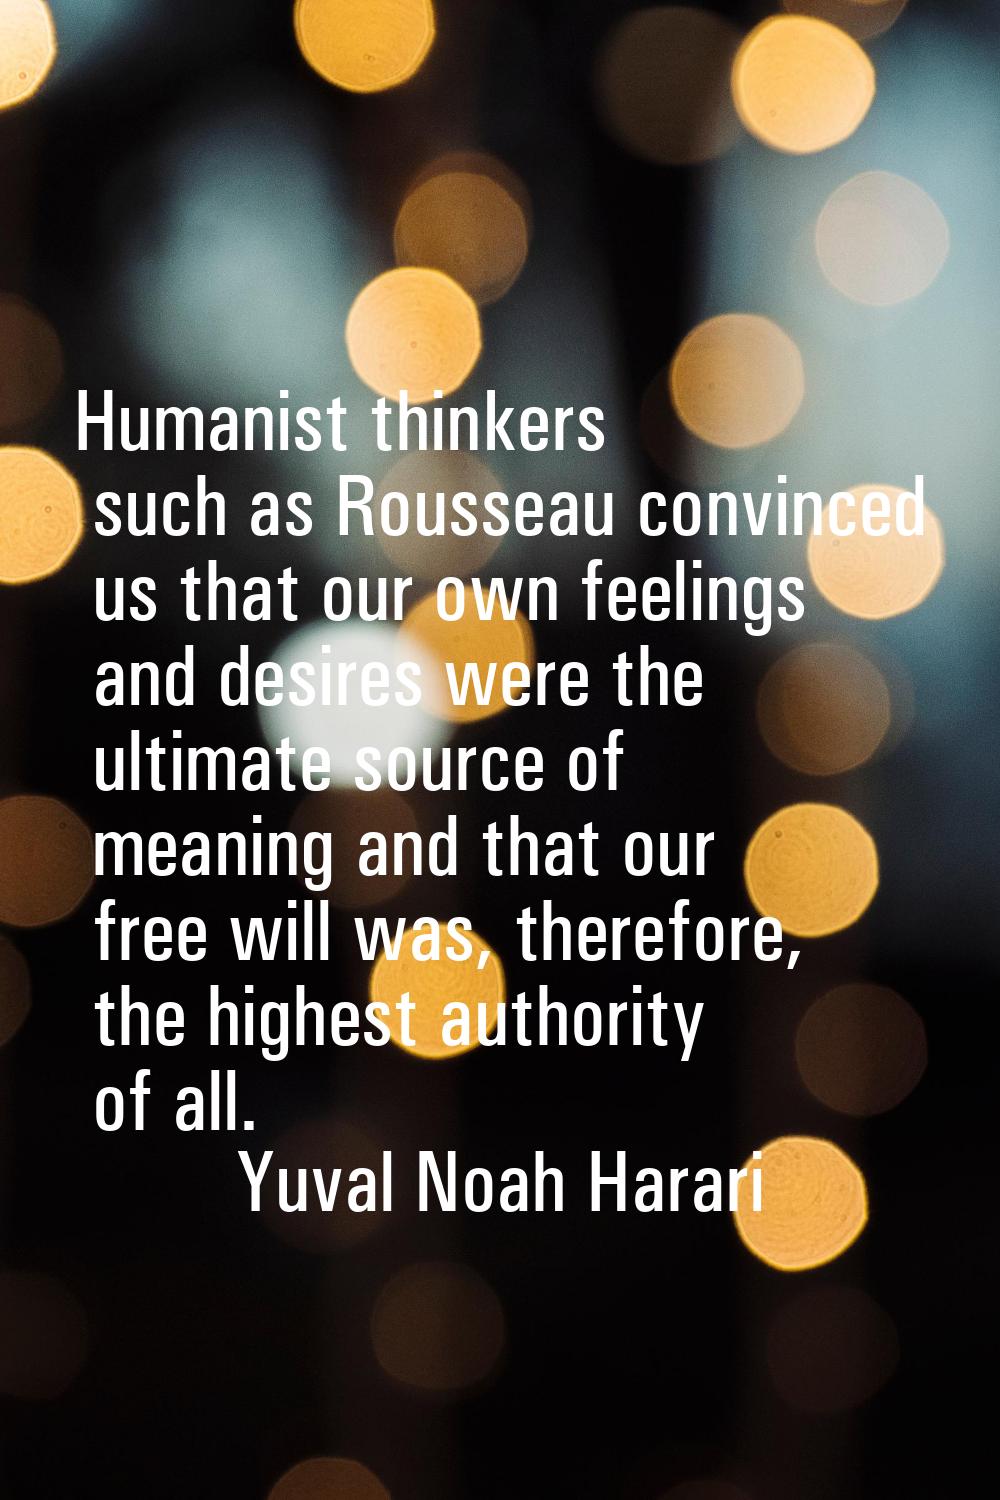 Humanist thinkers such as Rousseau convinced us that our own feelings and desires were the ultimate